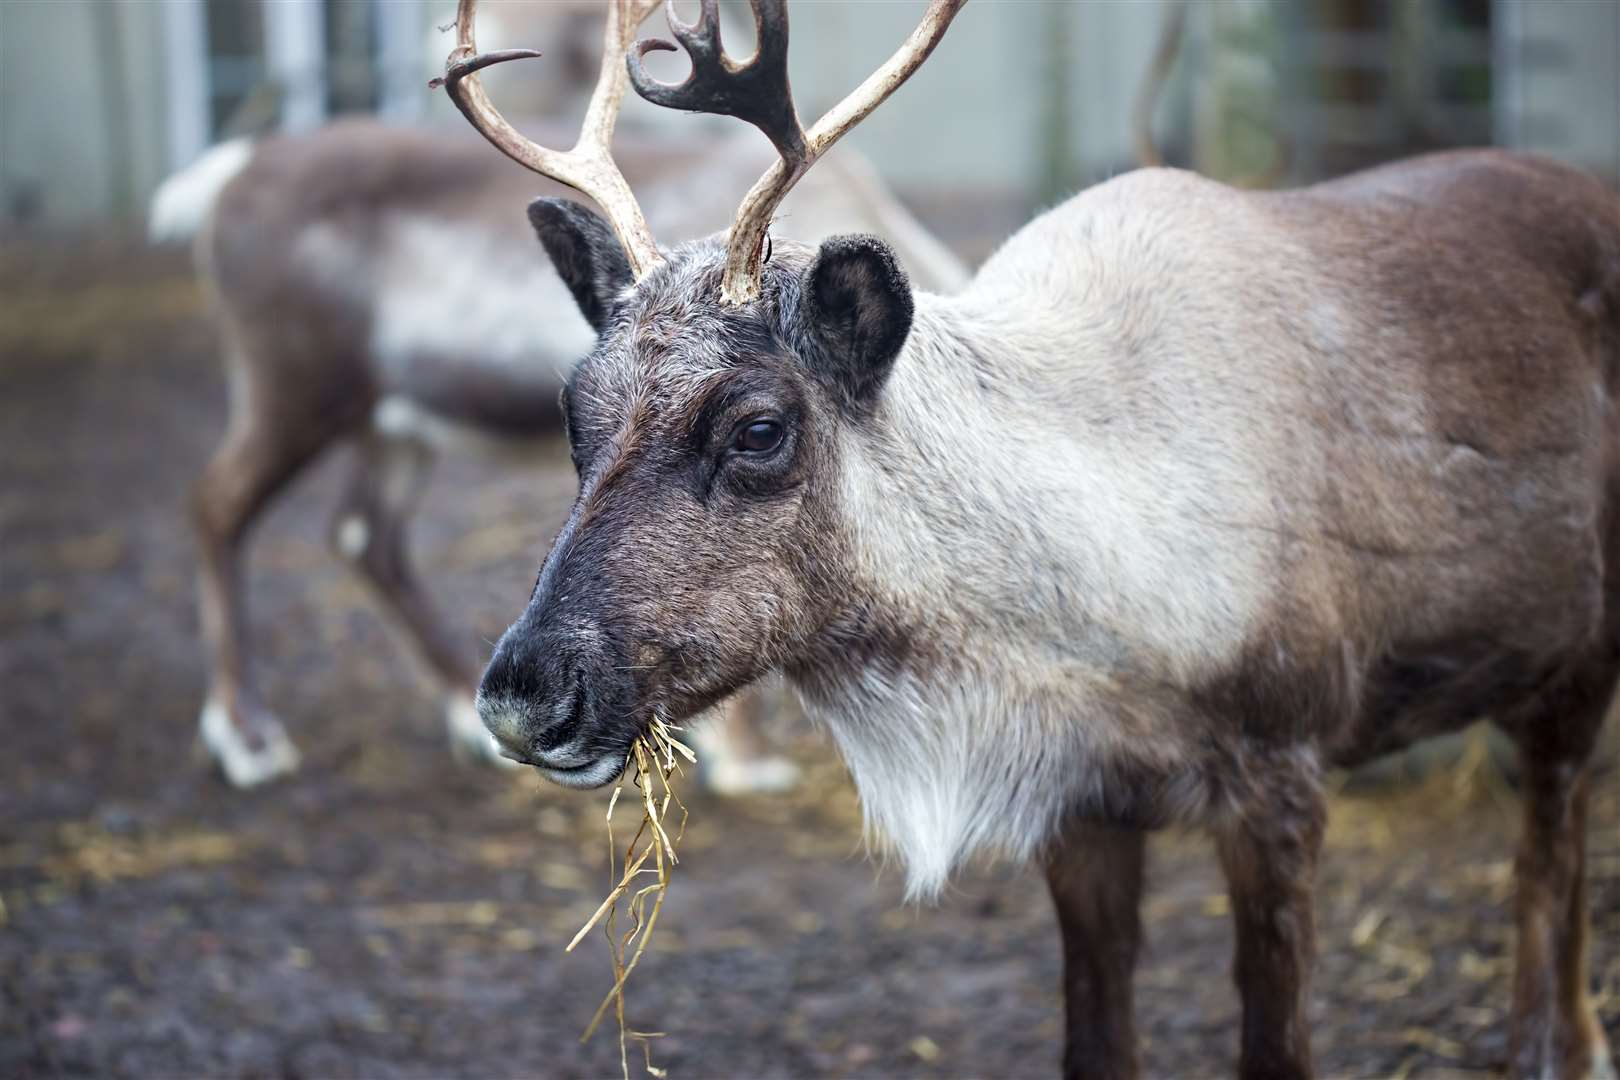 Have some visiting reindeer ever left mess in your house?